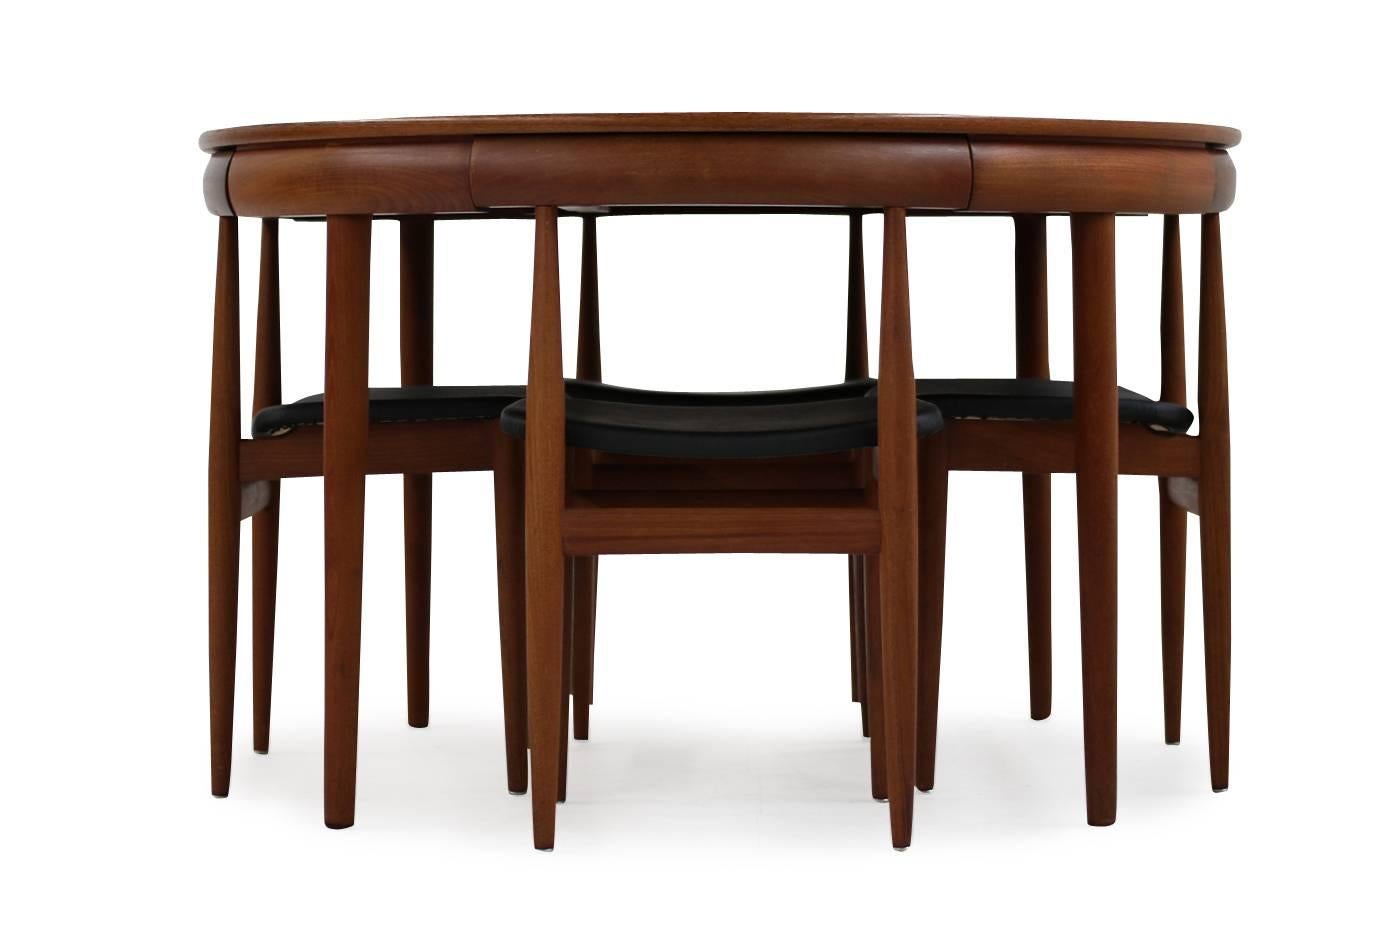 Beutiful and rare Hans Olsen teak dining set, Frem Rojle, Denmark.
Extendable teak dining table and six teak chairs.
All six chars with new upholstery and black real leather in high quality. An extendable dining table in good vintage condition